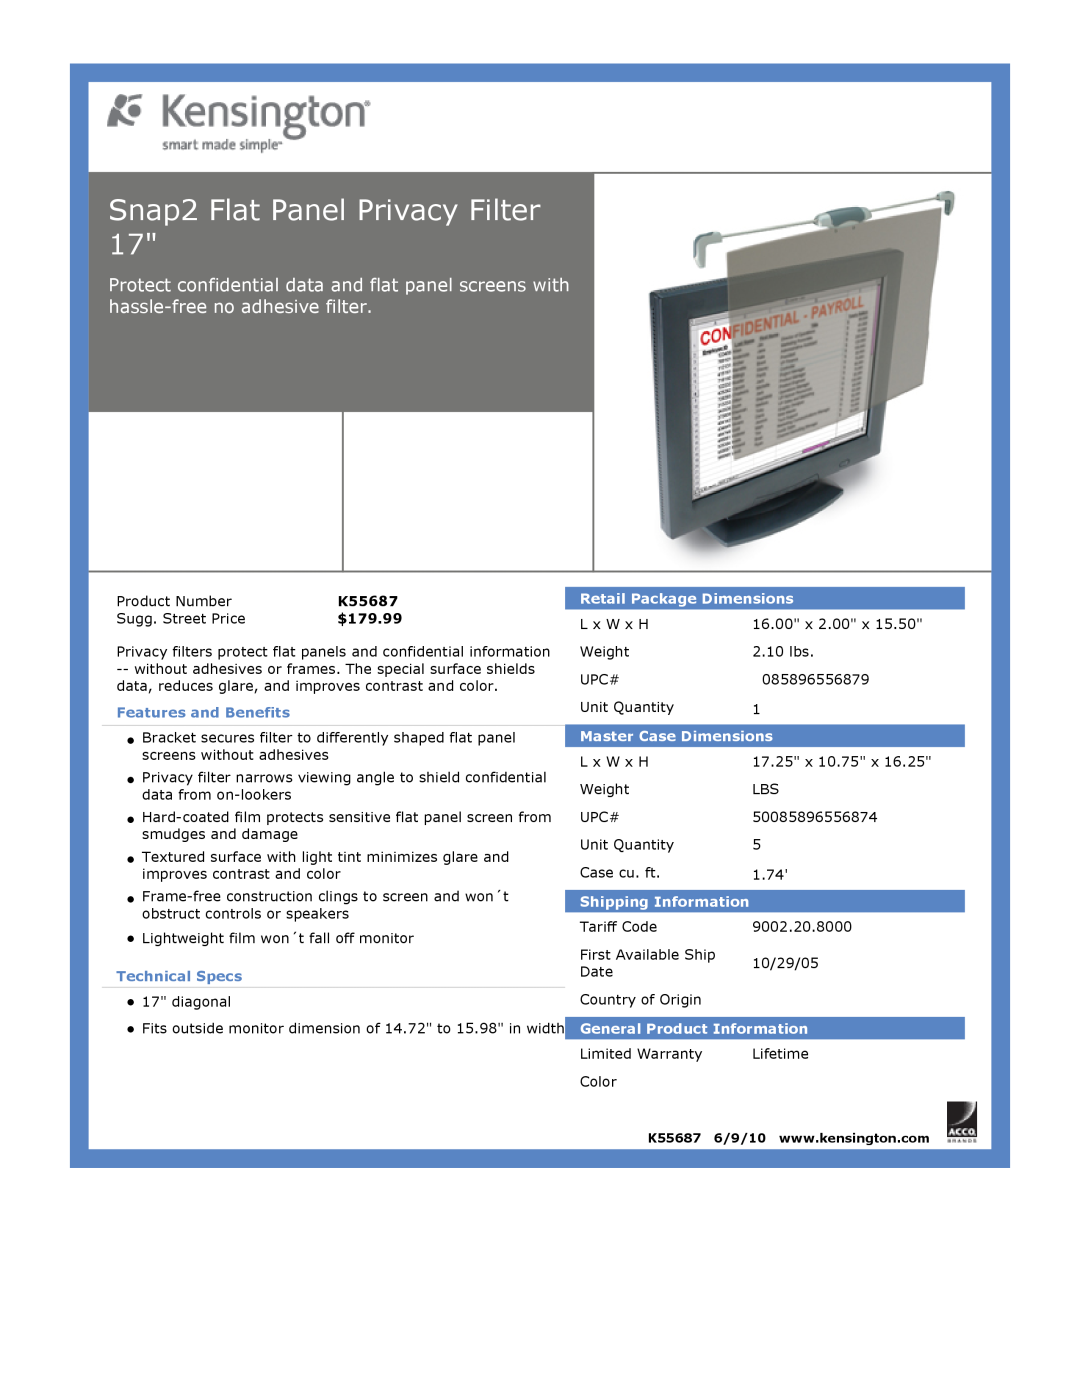 Kensington EU64325 Snap2 Flat Panel Privacy Filter, K55687, Features and Benefits, Technical Specs, Master Case Dimensions 